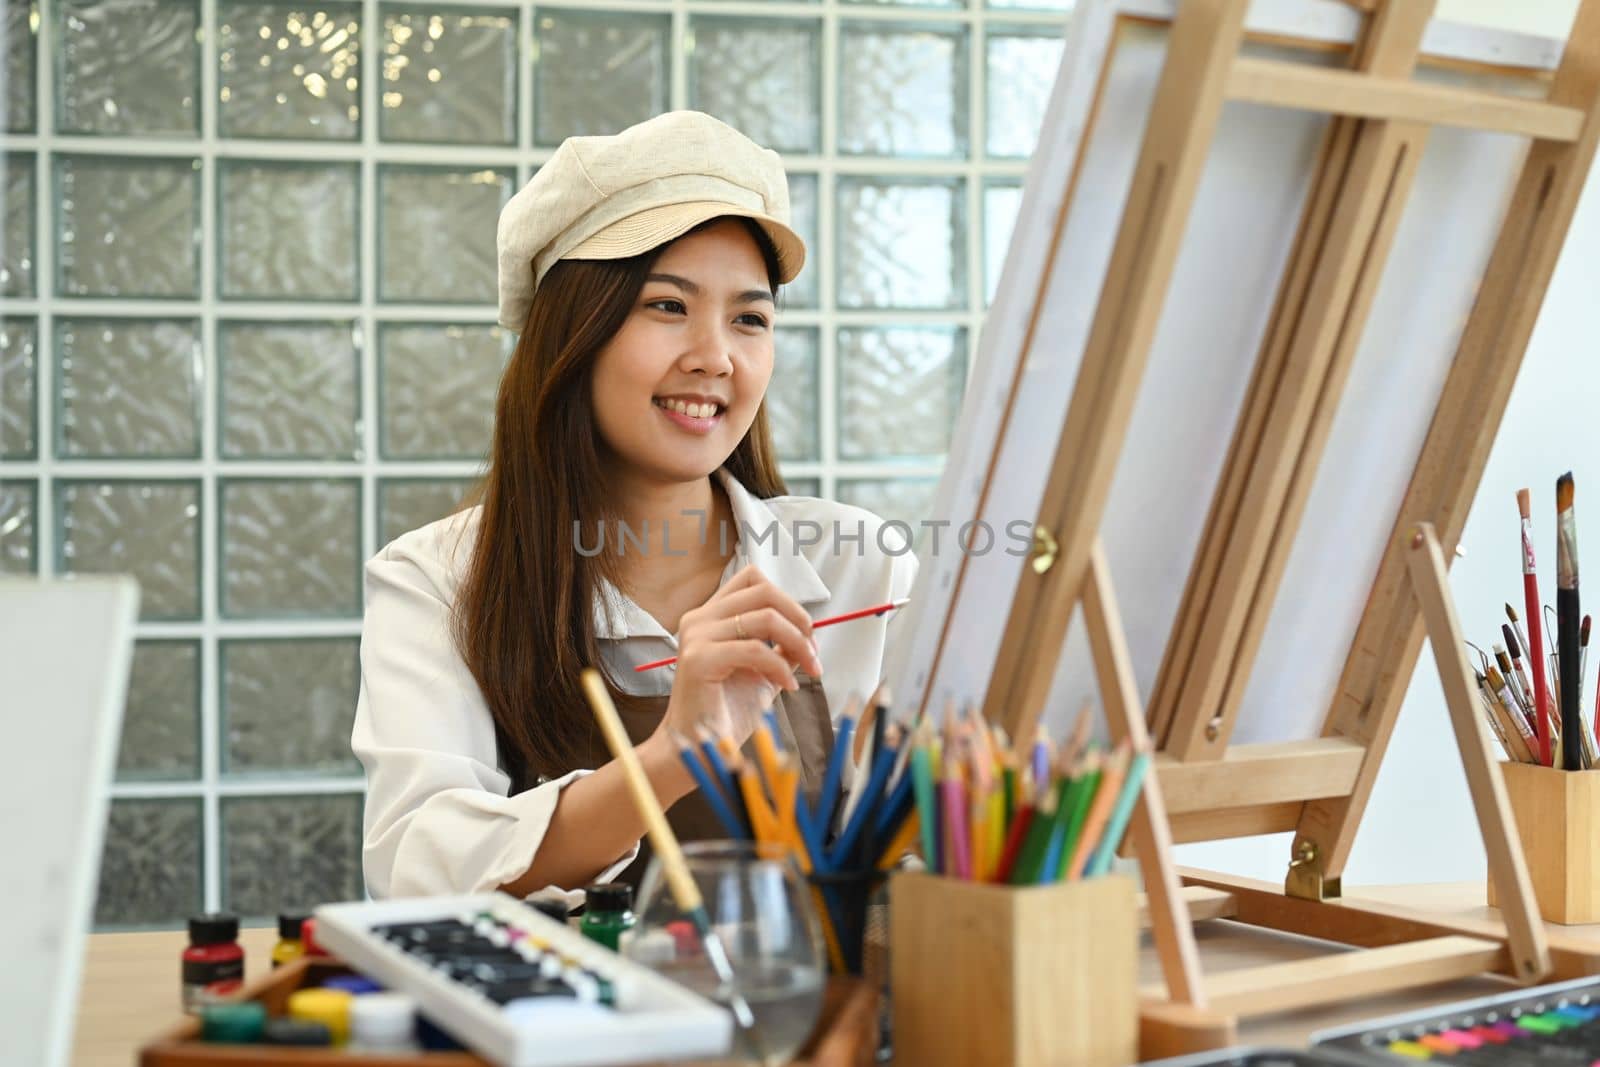 Smiling female painter sitting in front of canvas and painting picture with watercolor. Leisure activity concept.